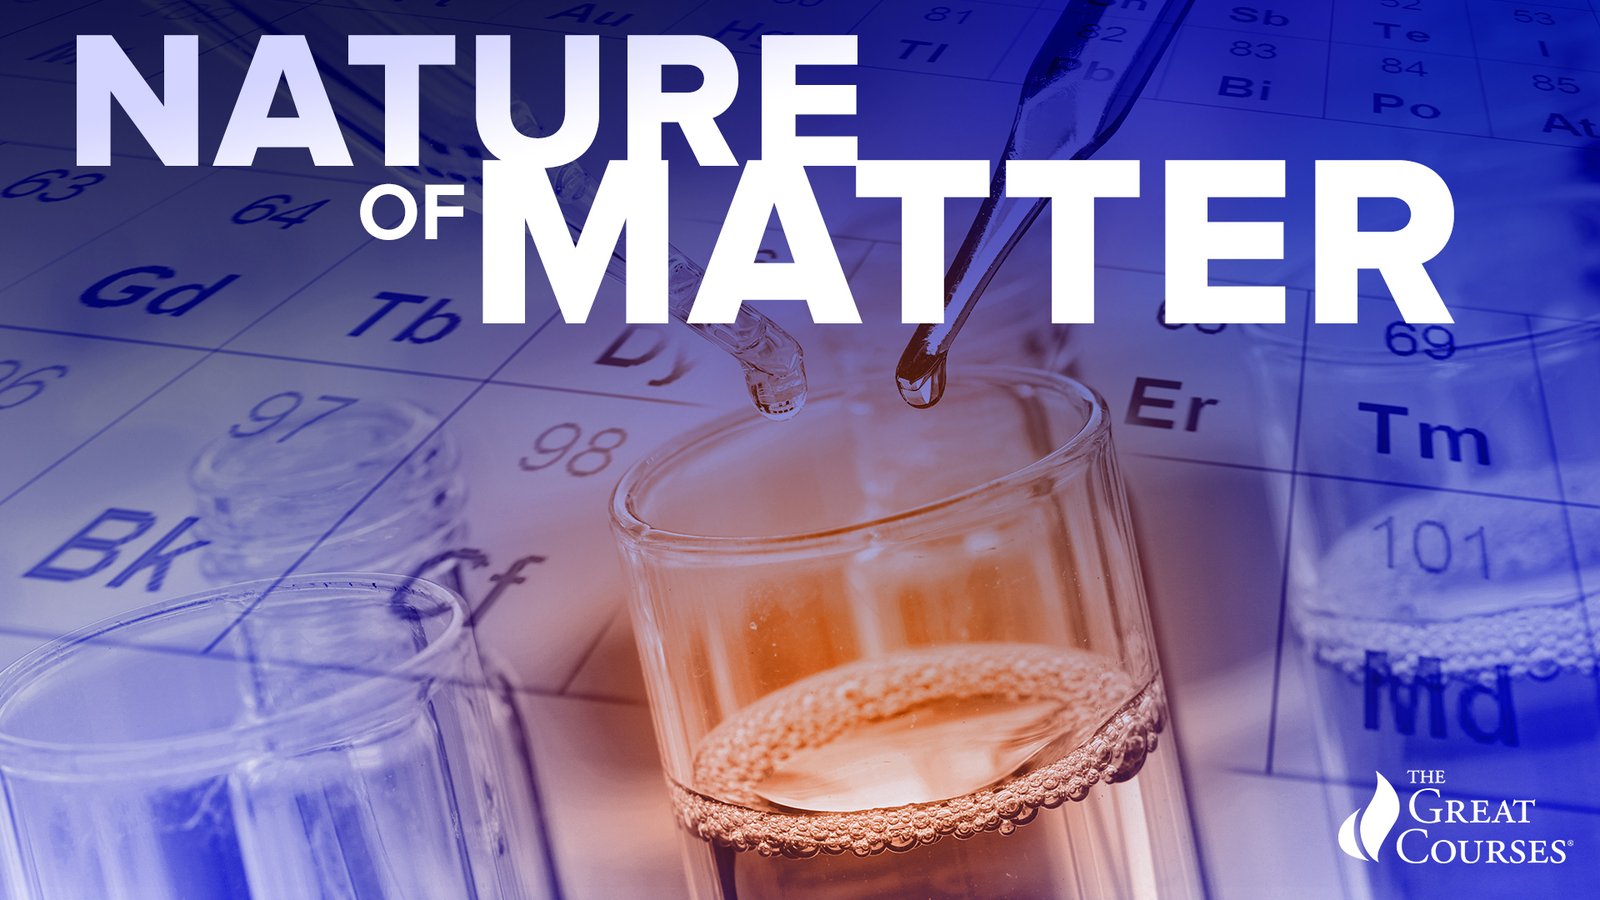 The Nature of Matter - Understanding the Physical World